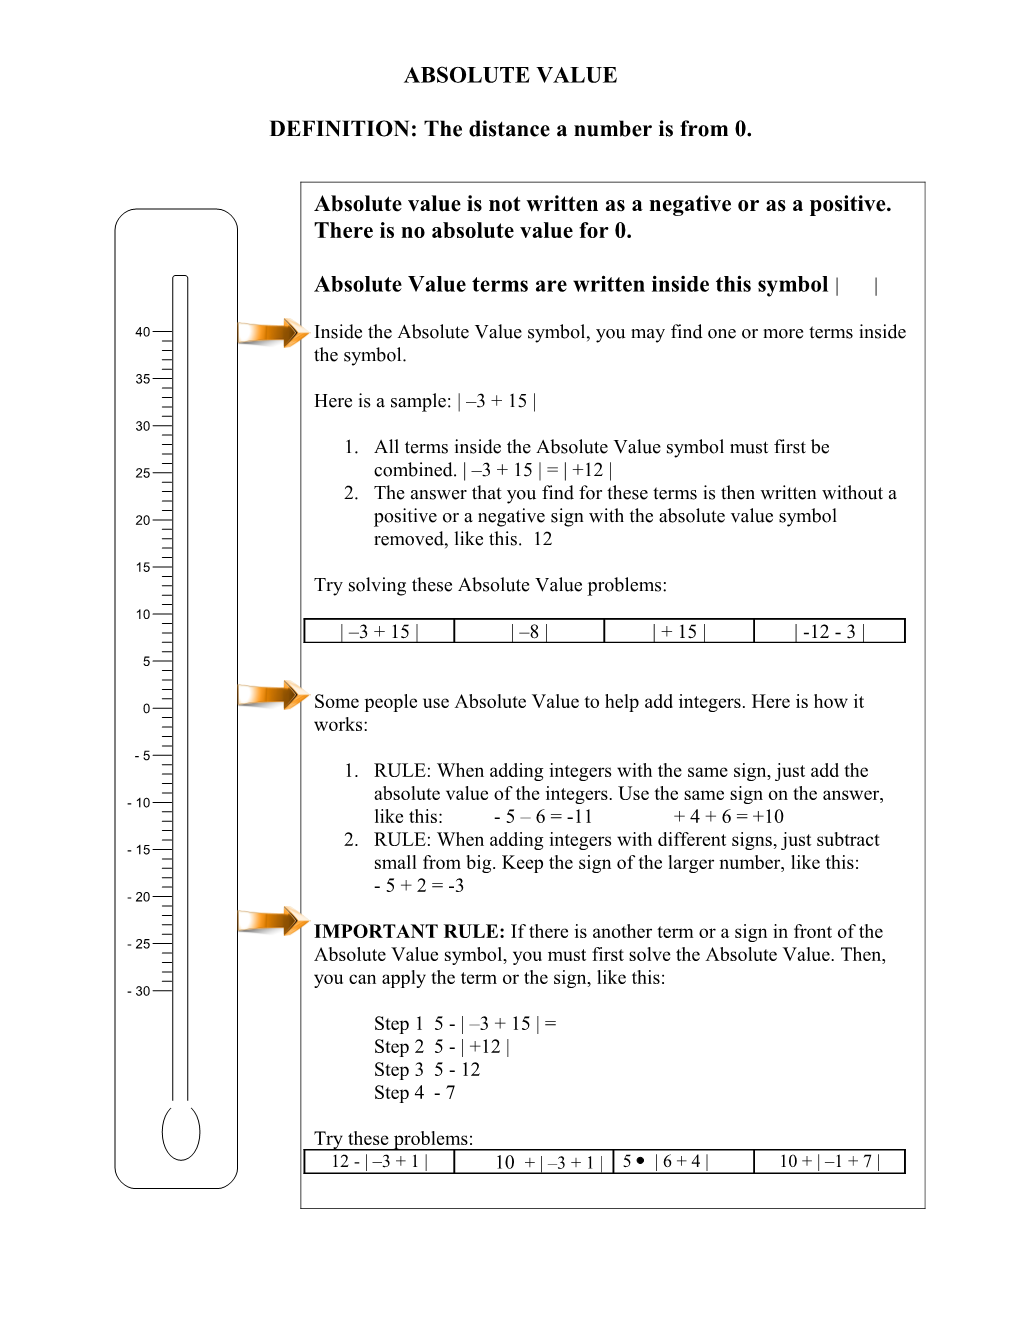 Homework: Adding and Subtracting Integers (Signed Numbers)Cr